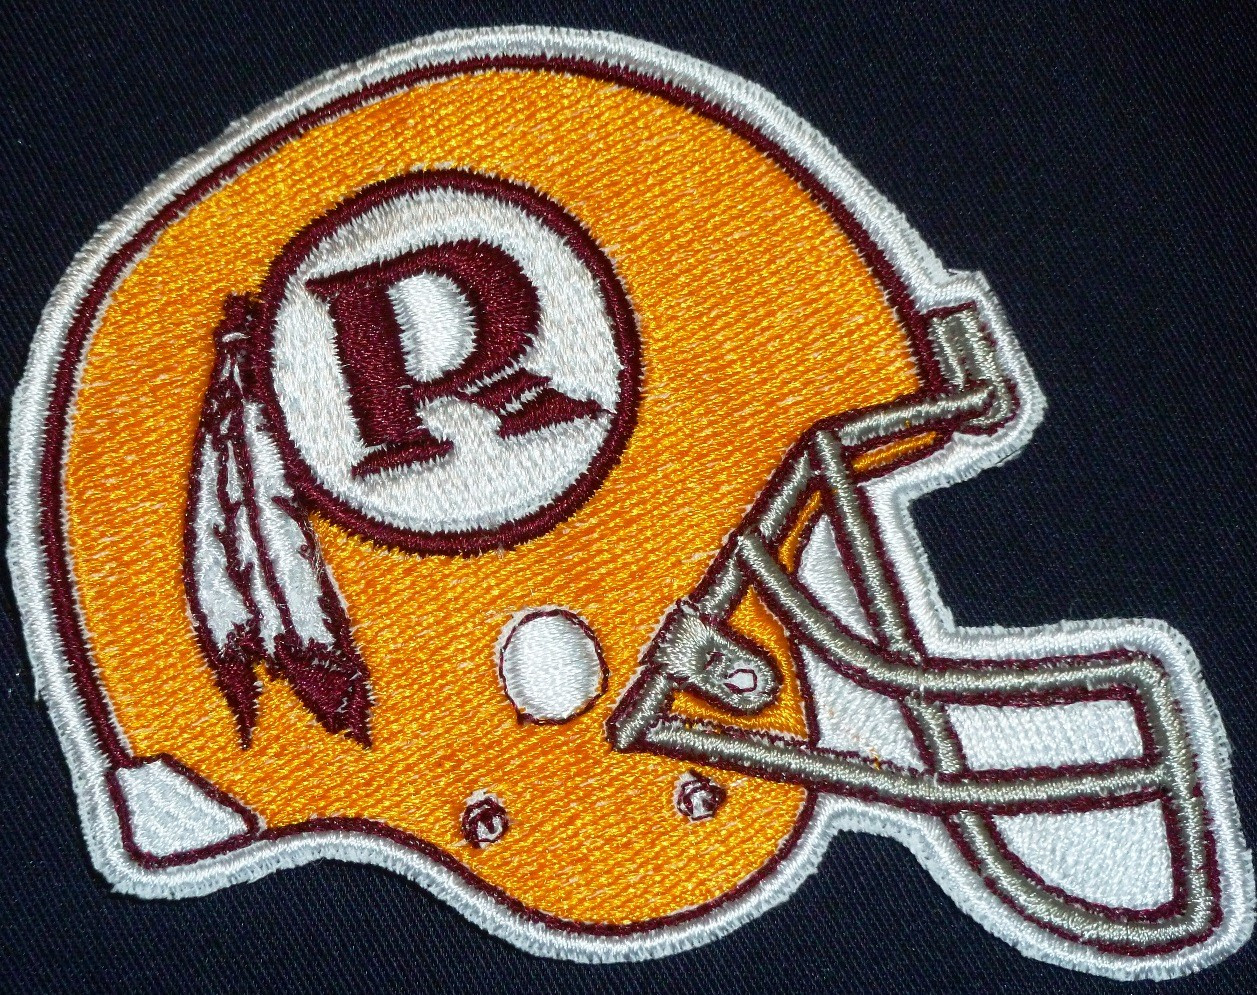 2 Washington Redskins vintage embroidered iron on patch 3" x 3" TOP QUALITY 